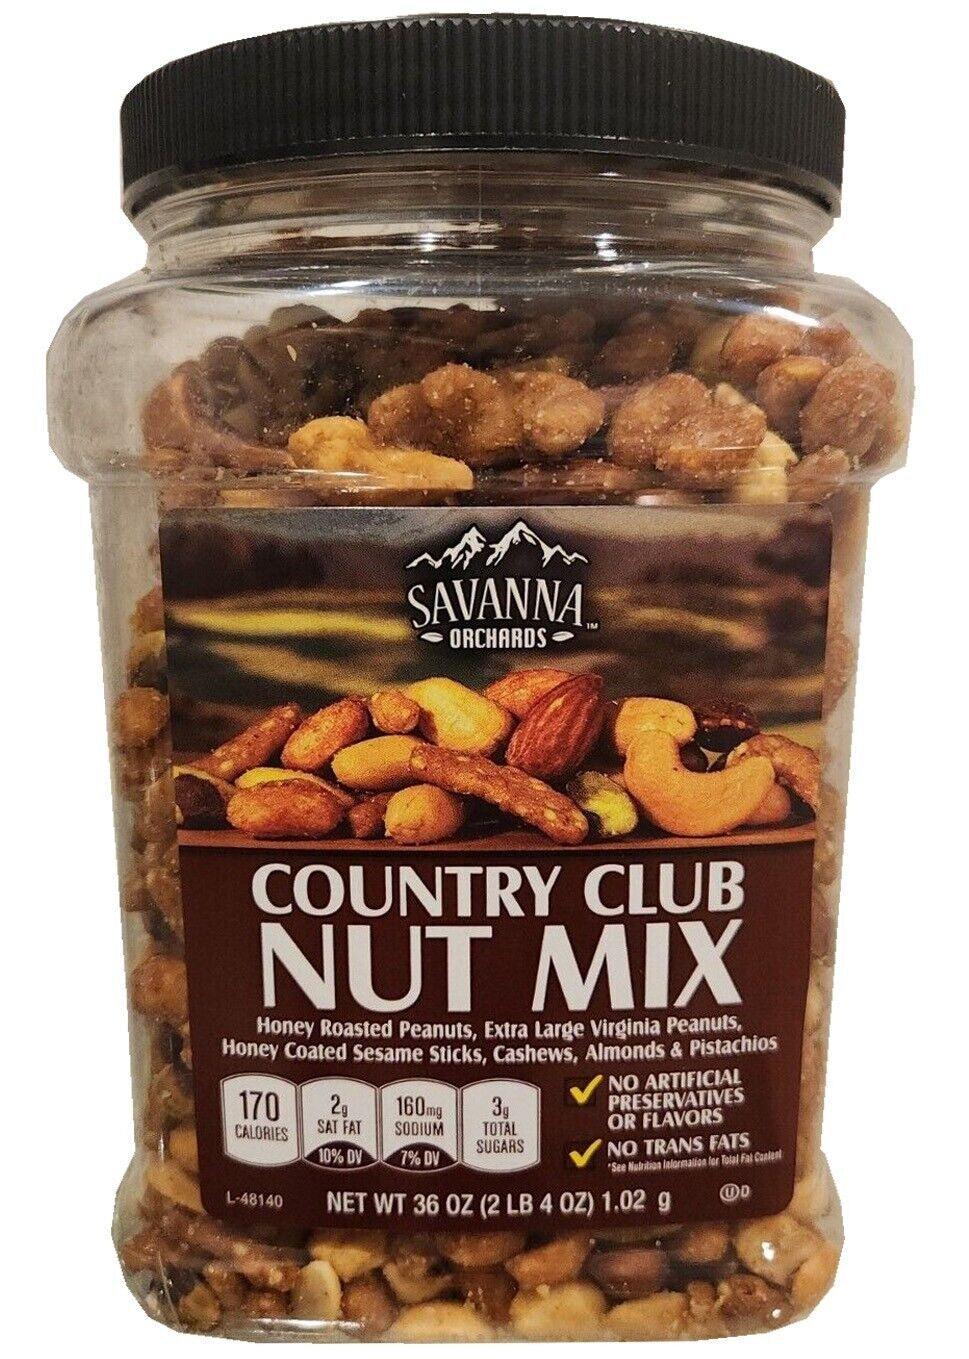 Savanna orchards country club nut mix